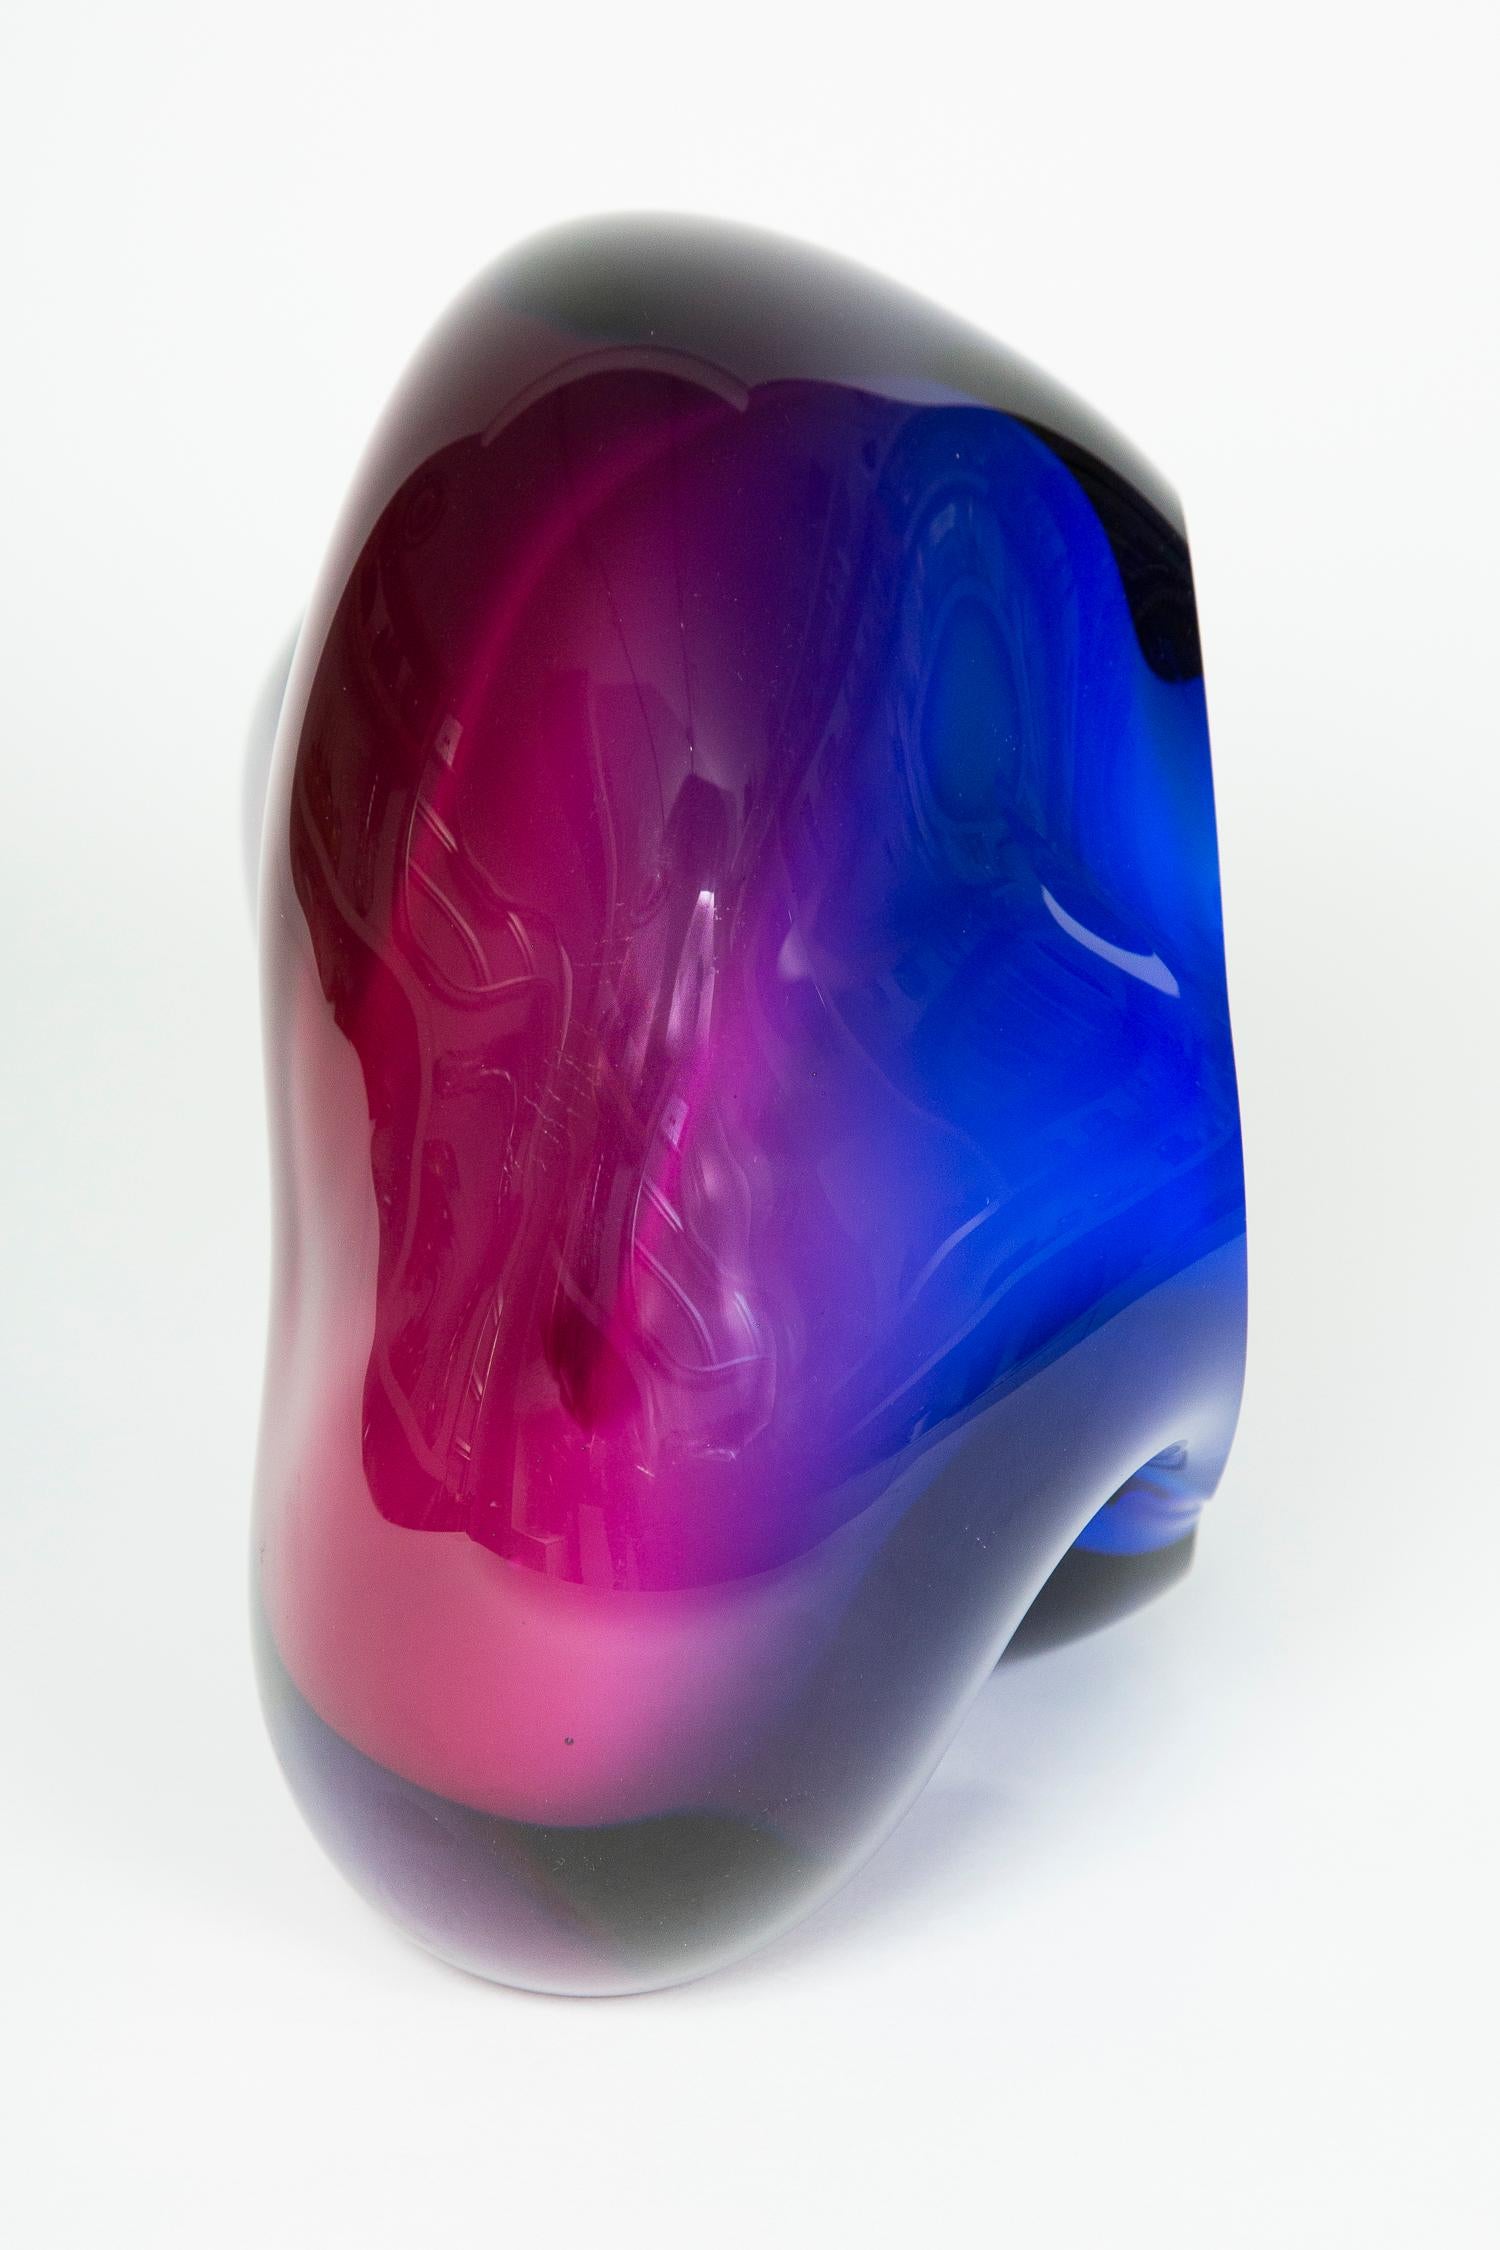 Hand-Crafted Chromatic Vug in Blue and Fuchsia Unique Glass Sculpture by Samantha Donaldson